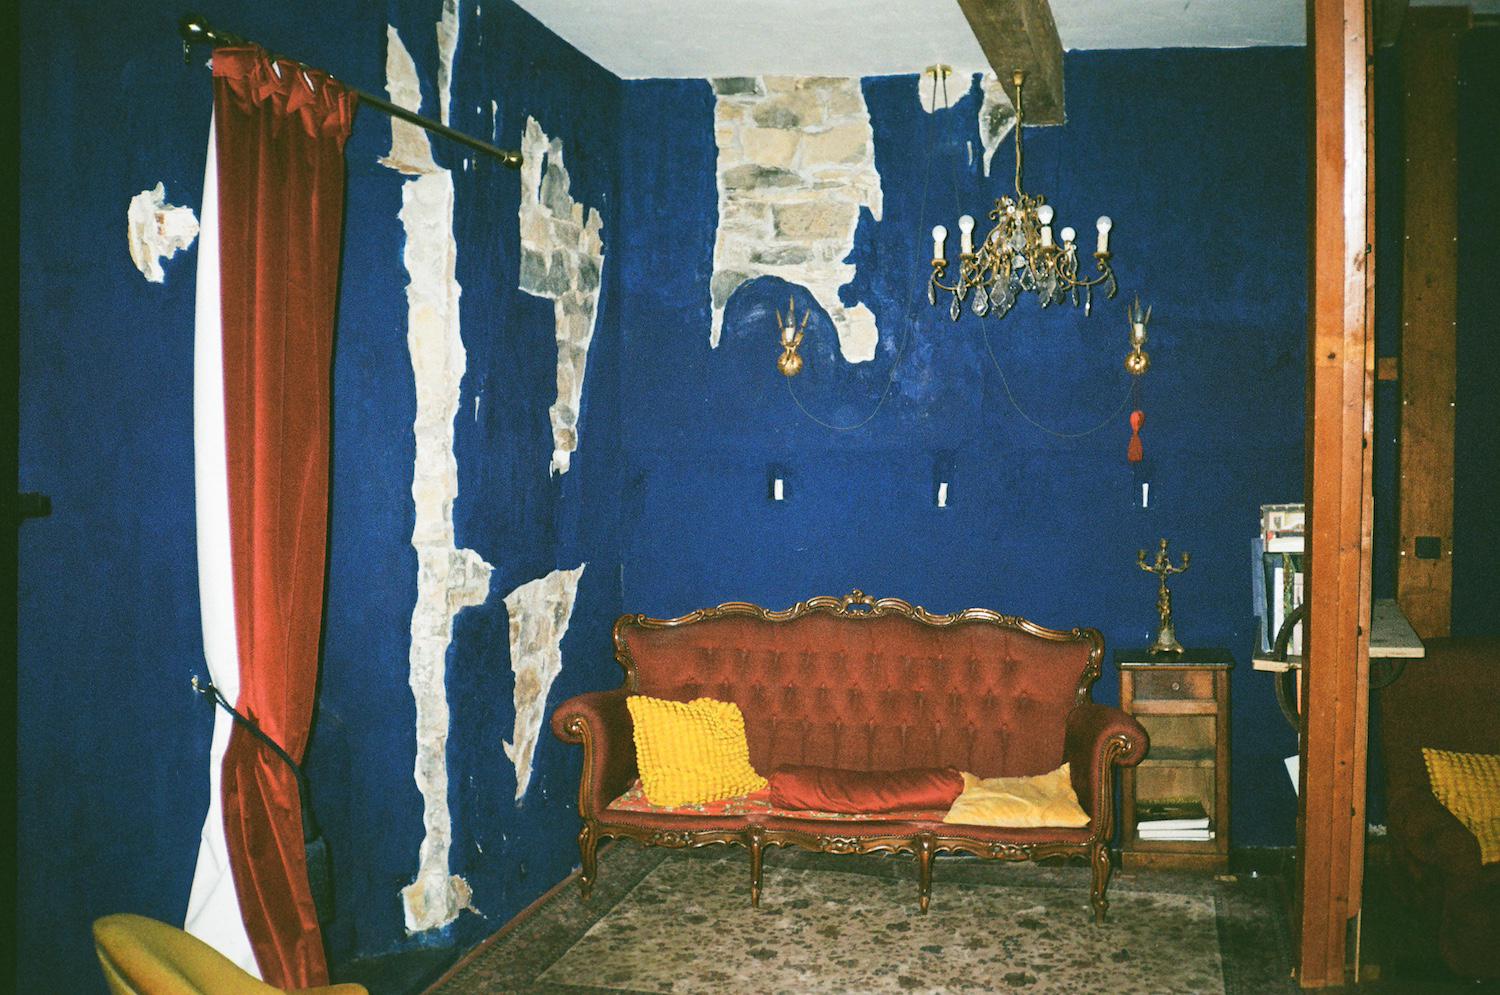 blue painted onto the wall, although some cracks showing bricks have been left exposed. in front, a chandelier, a red curtain, and a red deep button low sofa